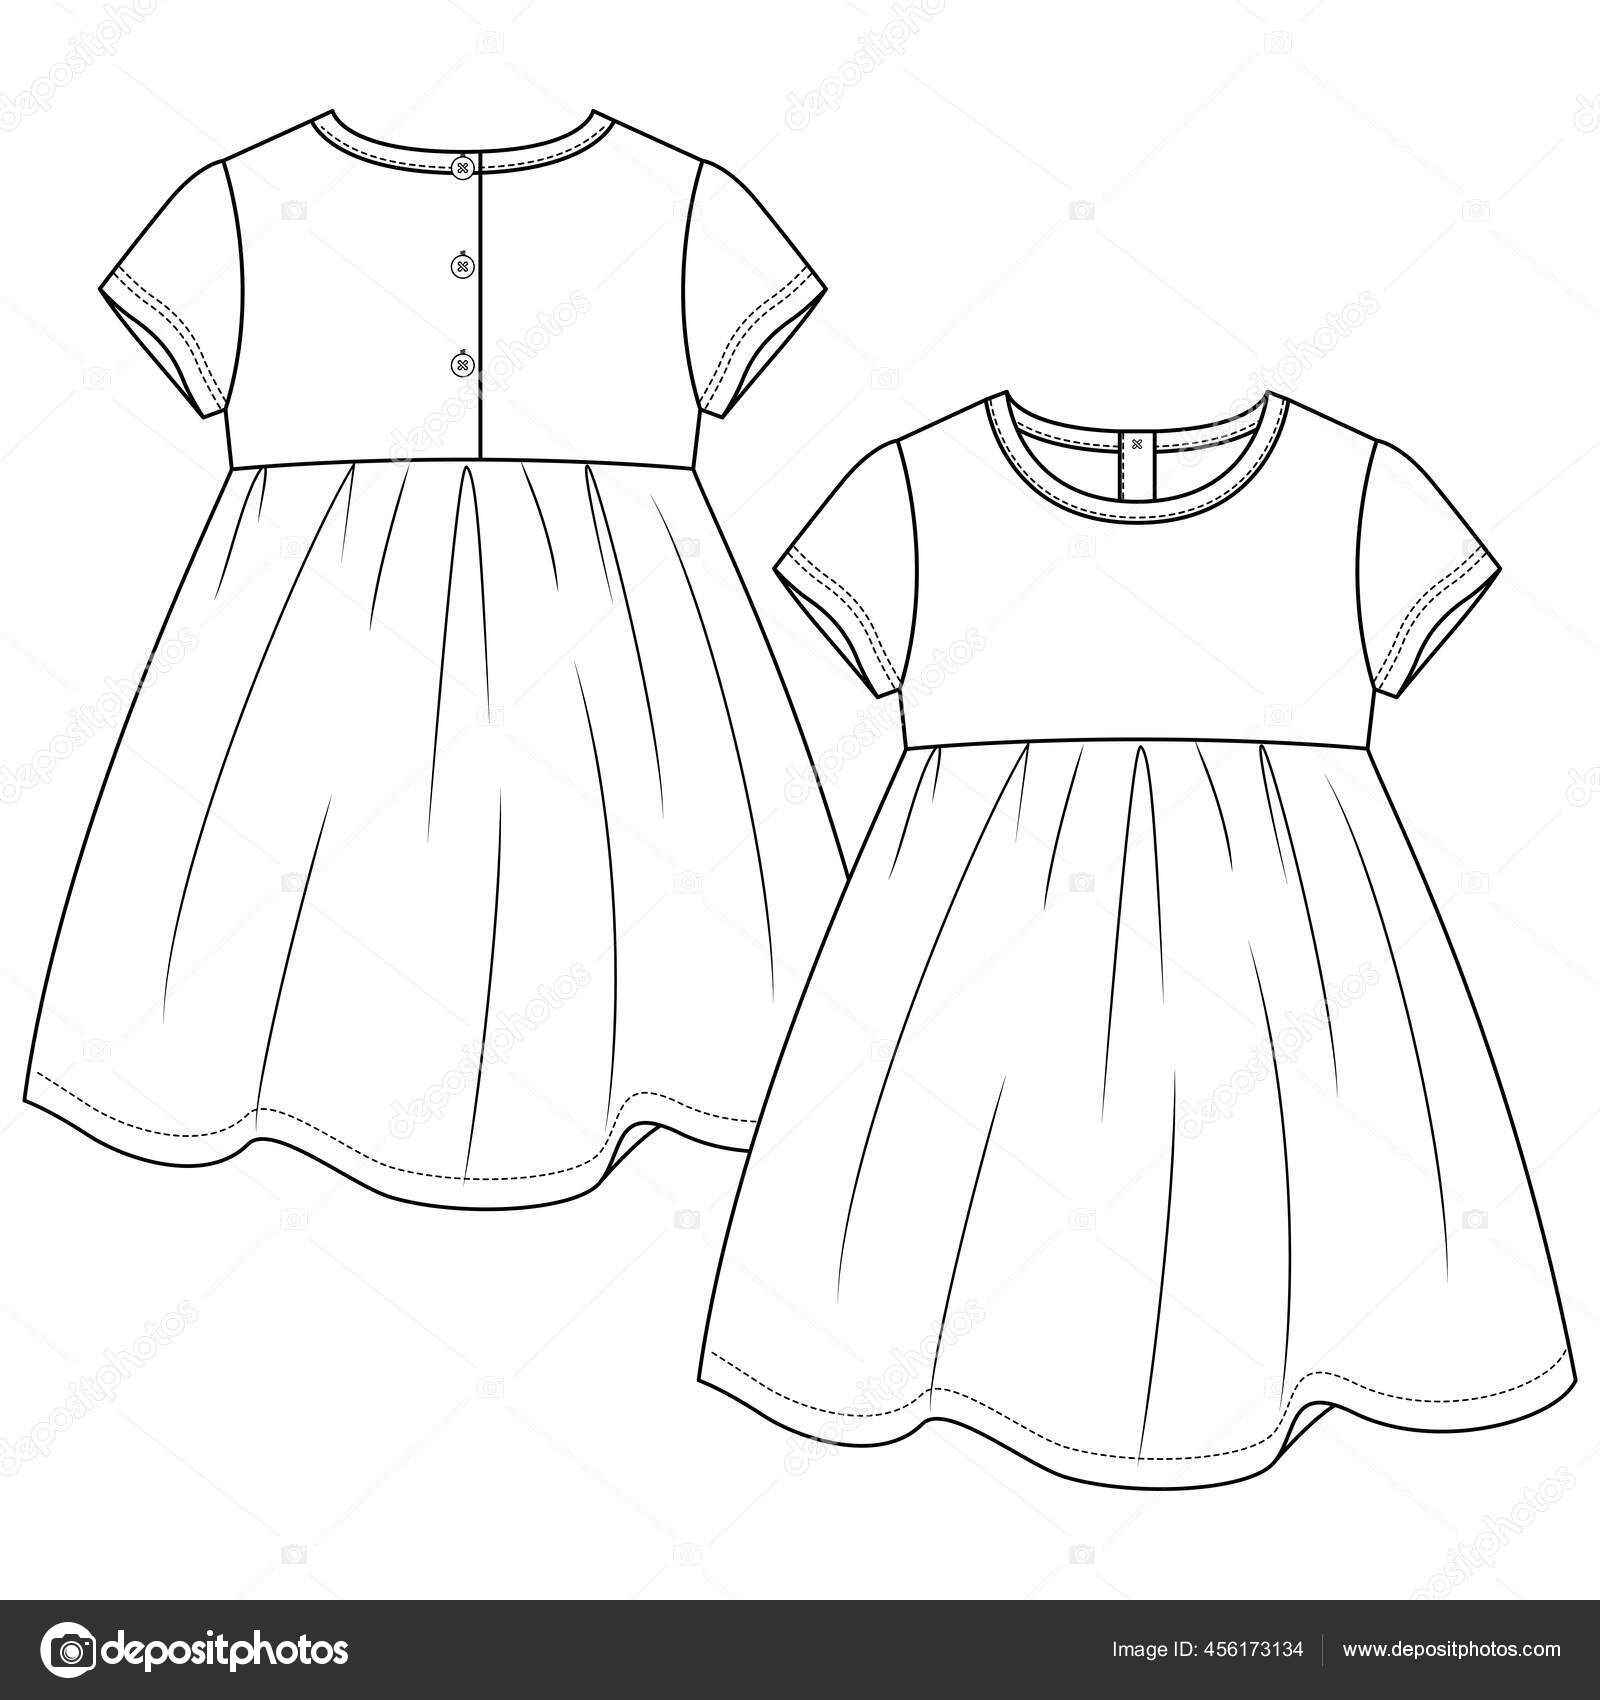 Baby Girle: Over 780,200 Royalty-Free Licensable Stock Illustrations &  Drawings | Shutterstock